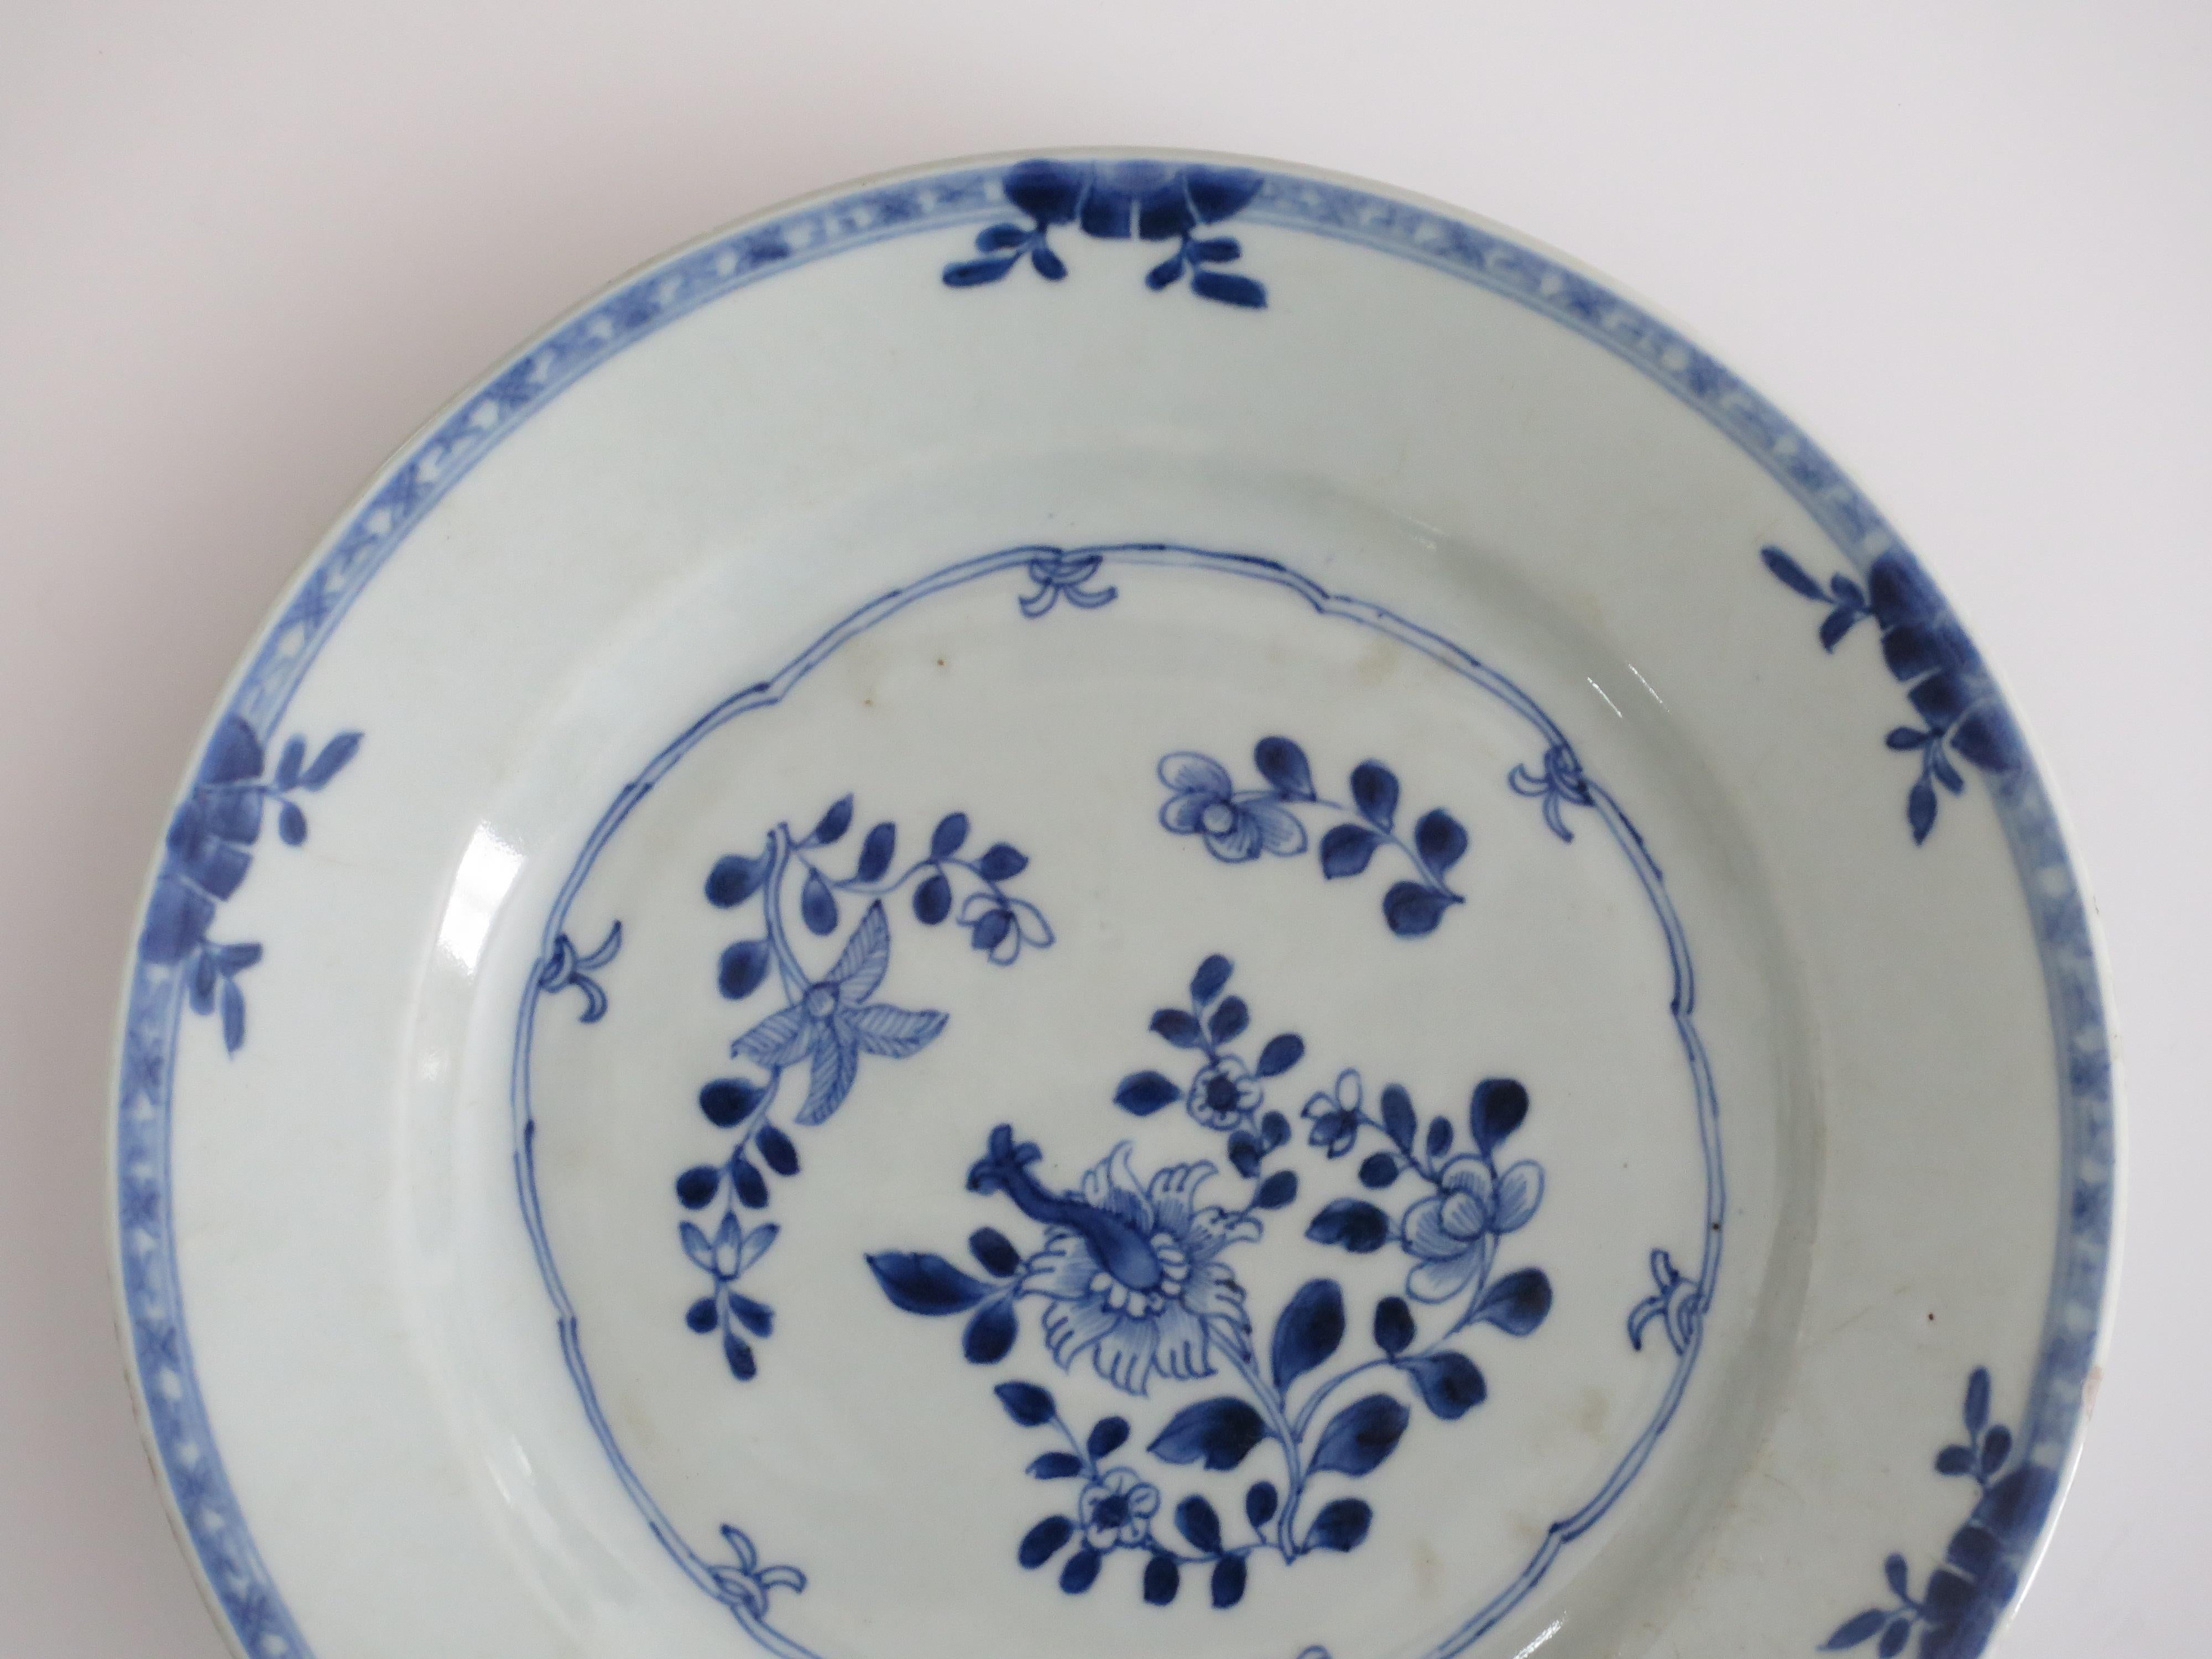 This is a hand painted blue and white Chinese porcelain plate, dating to the second half of the 18th century, circa 1770, Qing dynasty.

The plate is well potted, and has been hand decorated in a free flowing manner in varying shades of cobalt